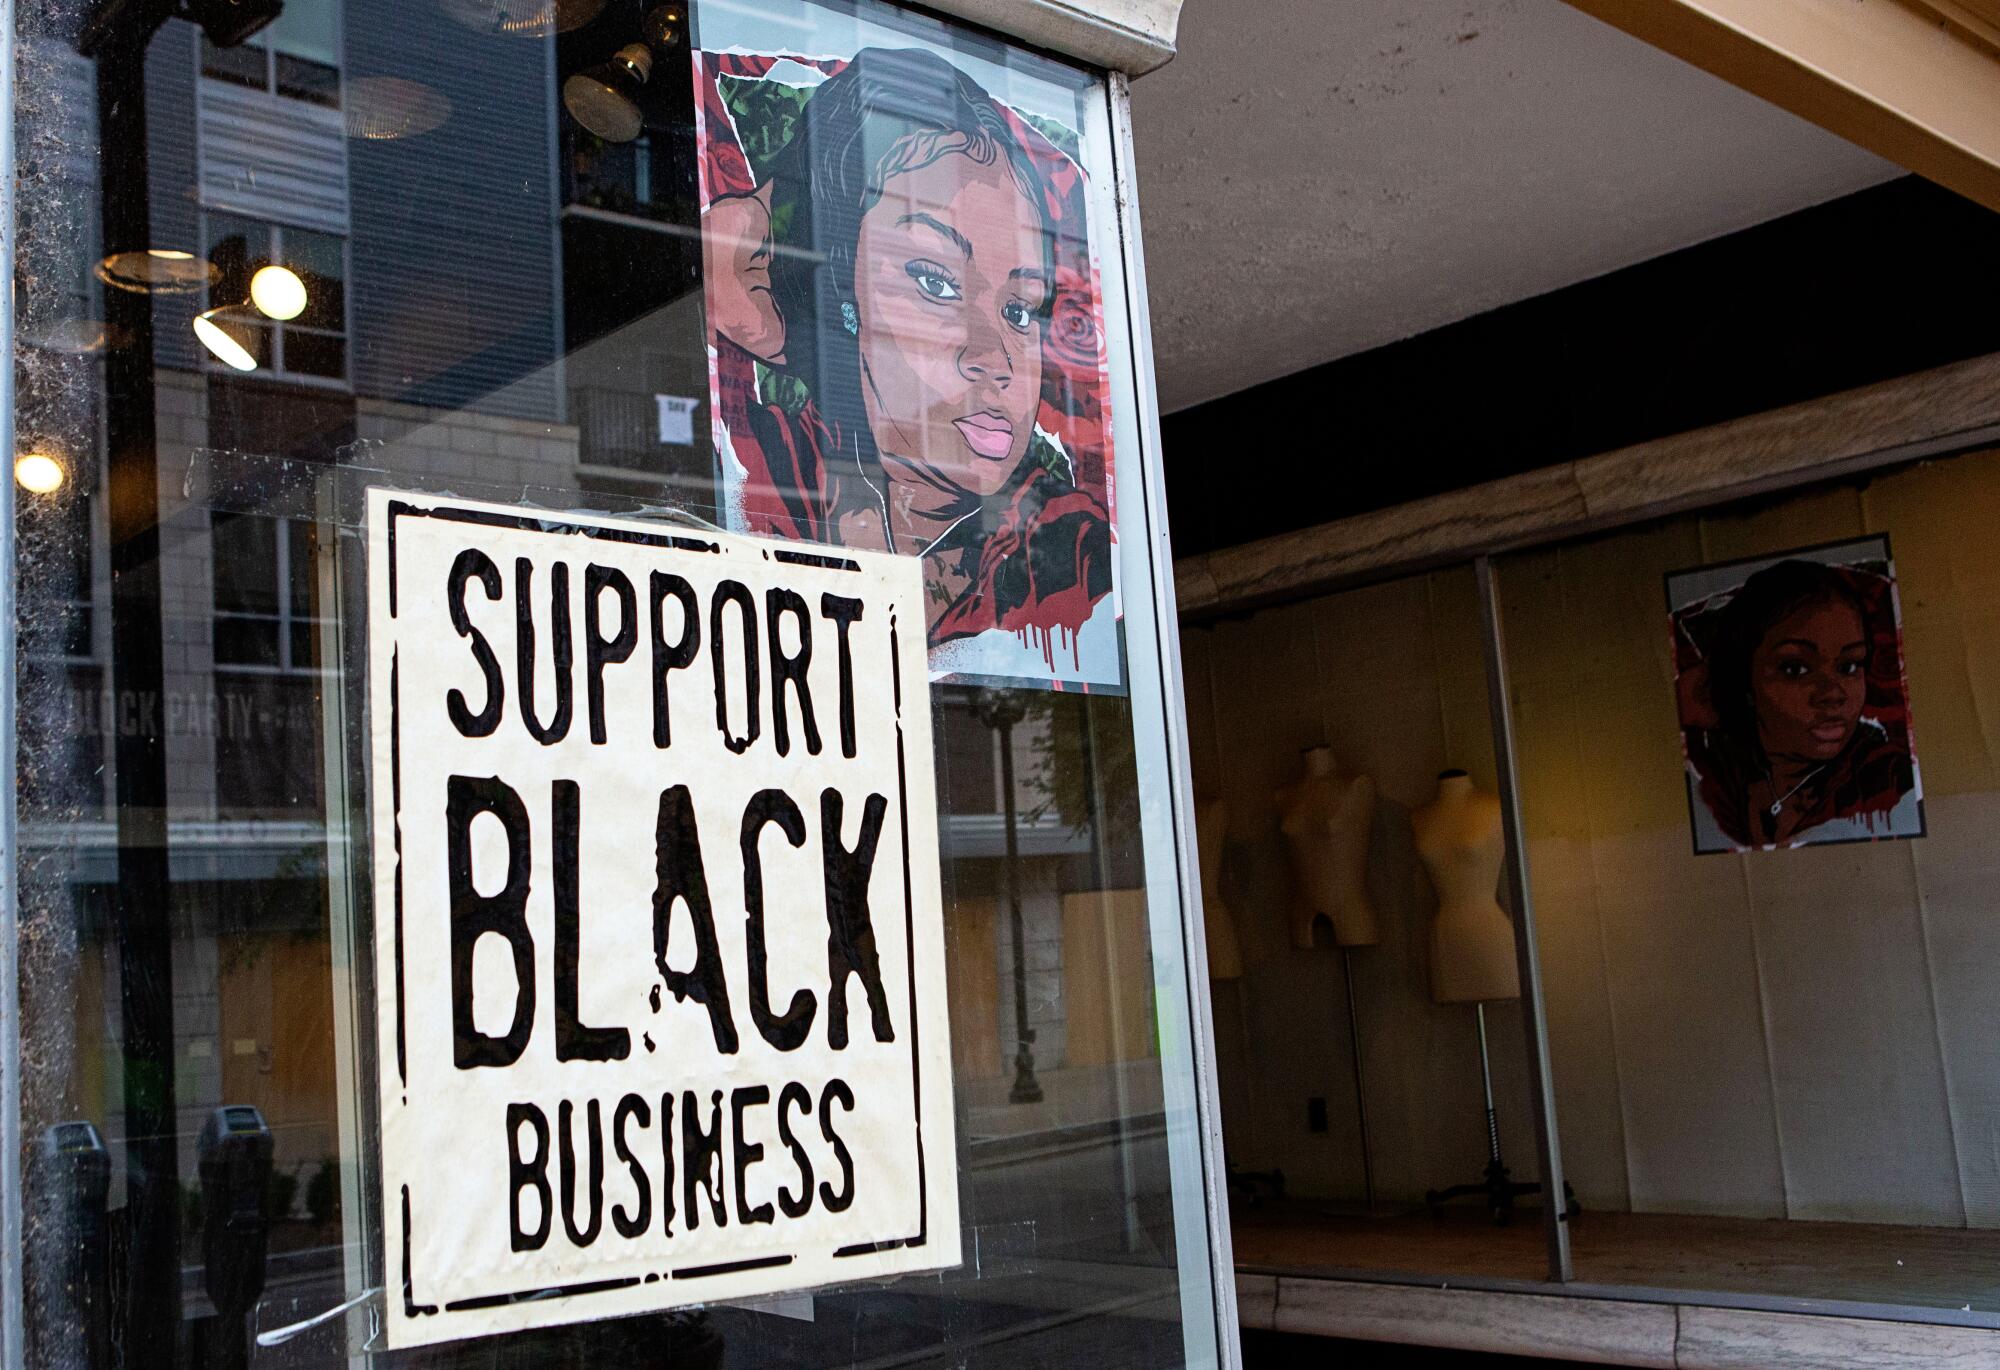  A portrait of Breonna Taylor is seen in the front window of a downtown Louisville business.